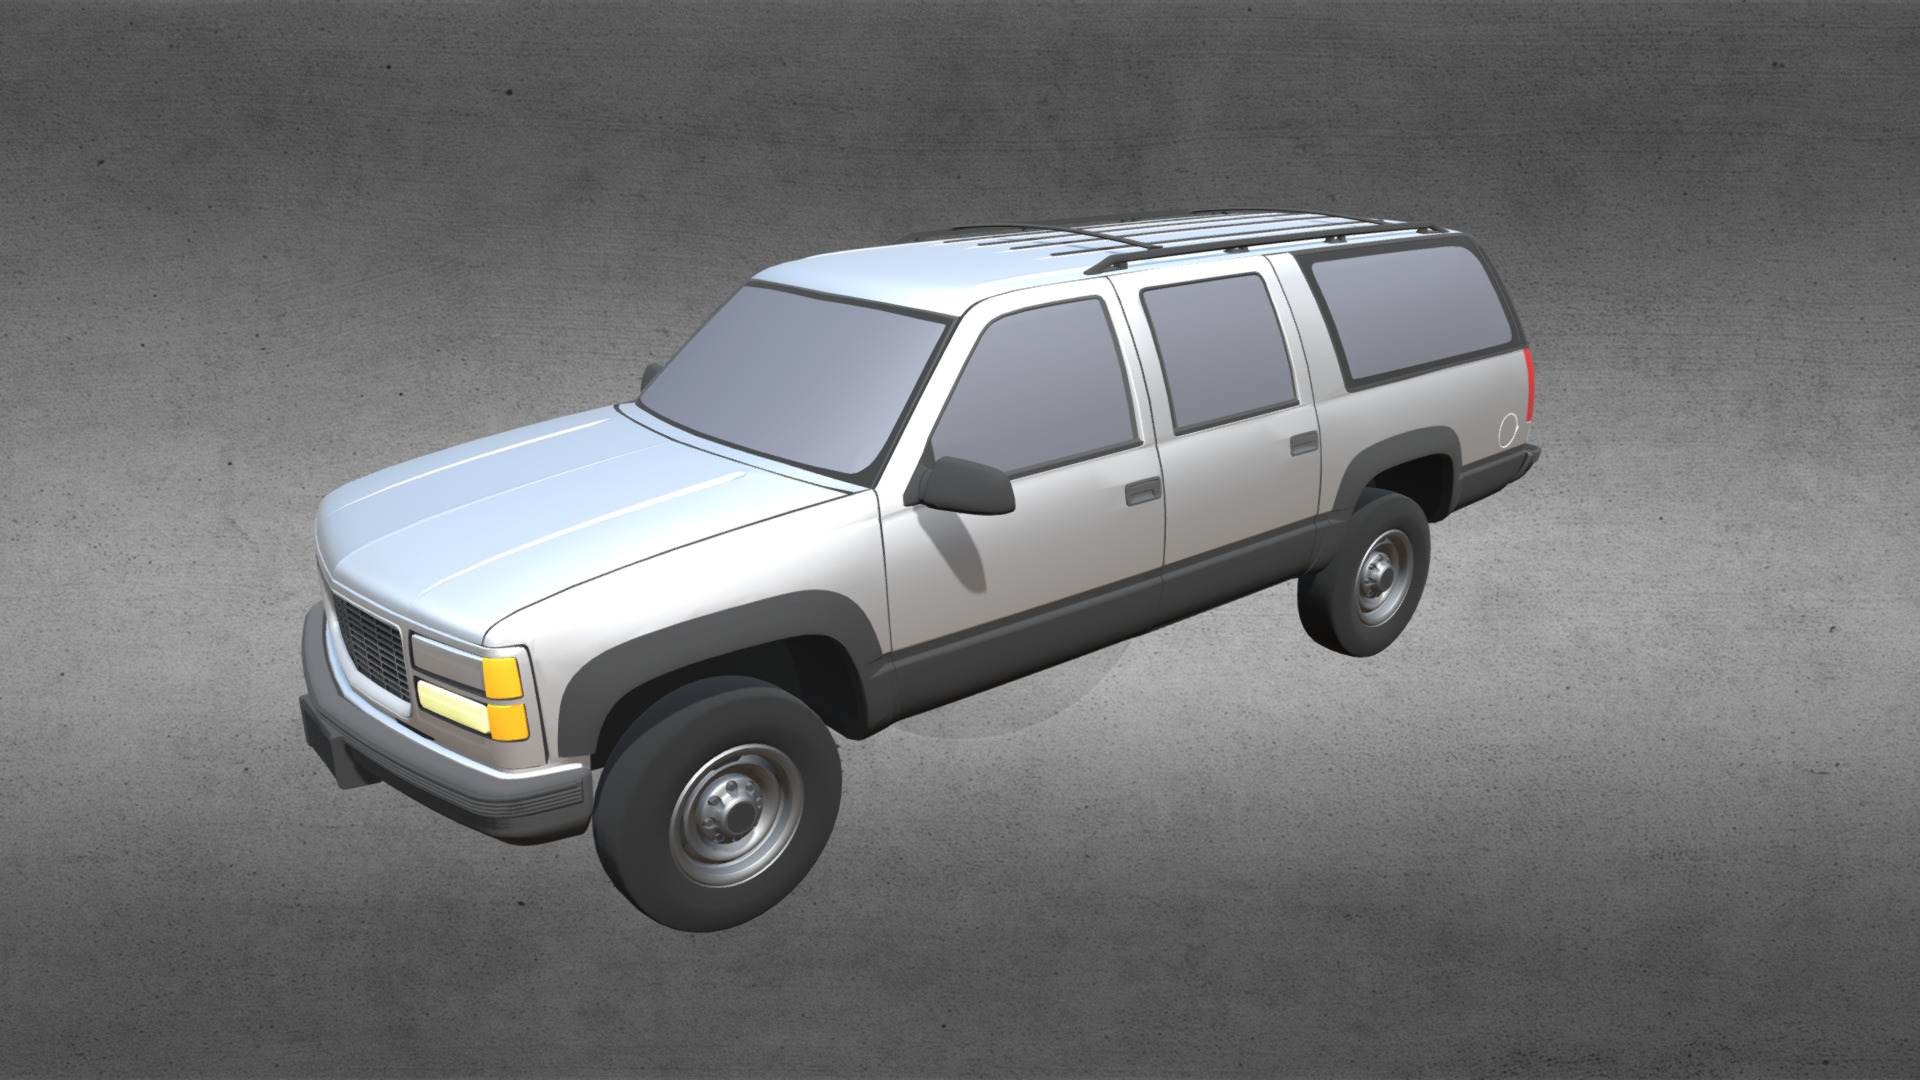 3D model Chevrolet Suburban 1998 - This is a 3D model of the Chevrolet Suburban 1998. The 3D model is about a car parked on pavement.